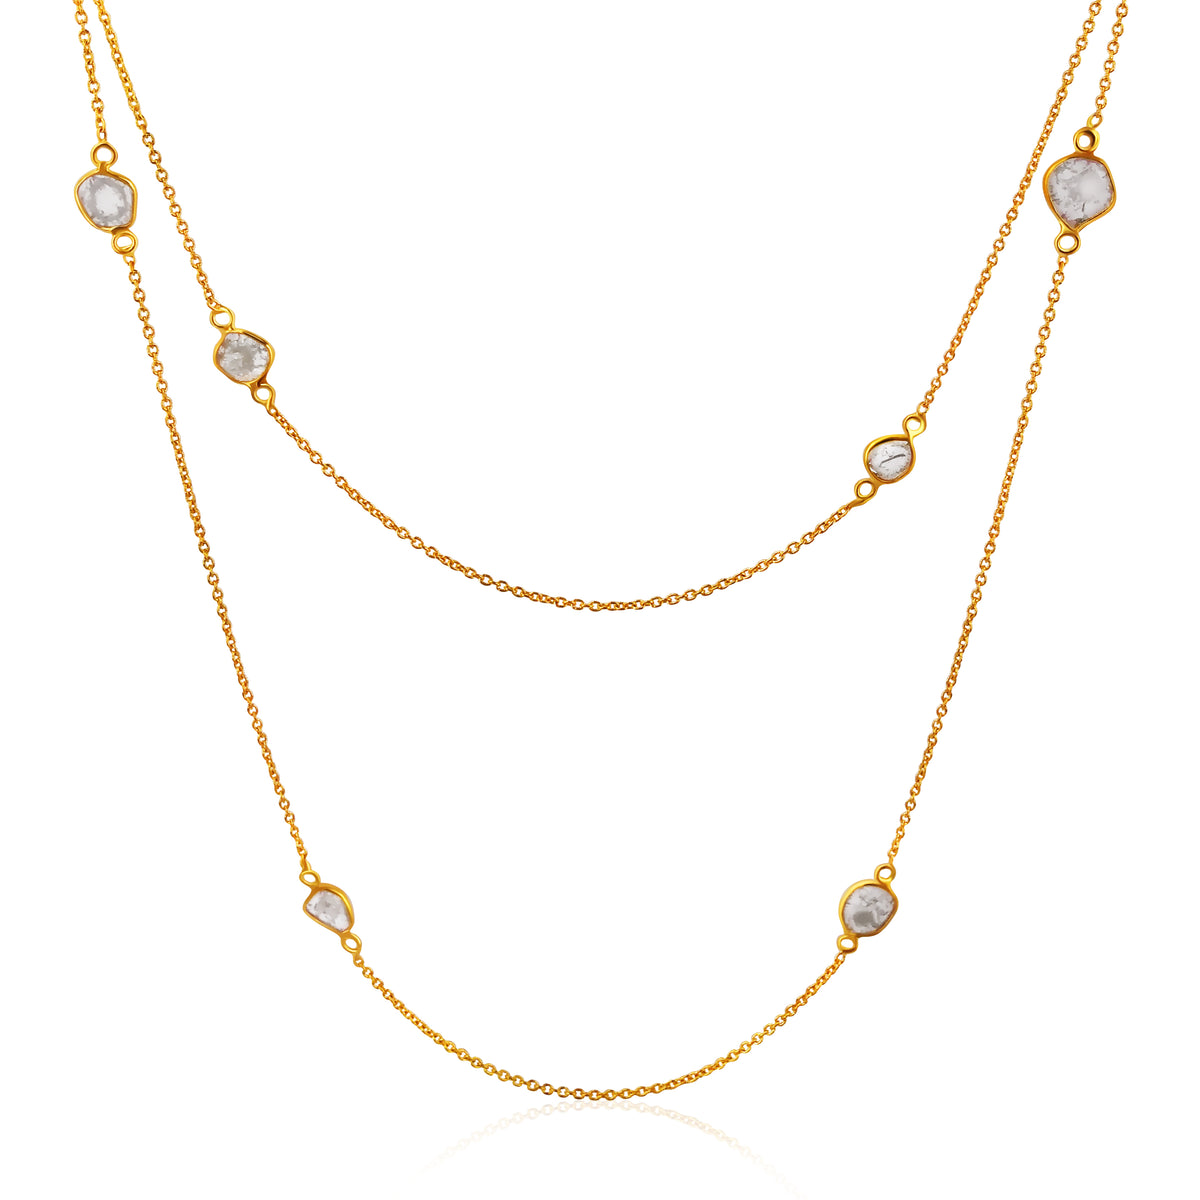 Rock & Divine Dawn Collection Lily Pad Diamond Necklace 18K Yellow Gold 1.6 CTW